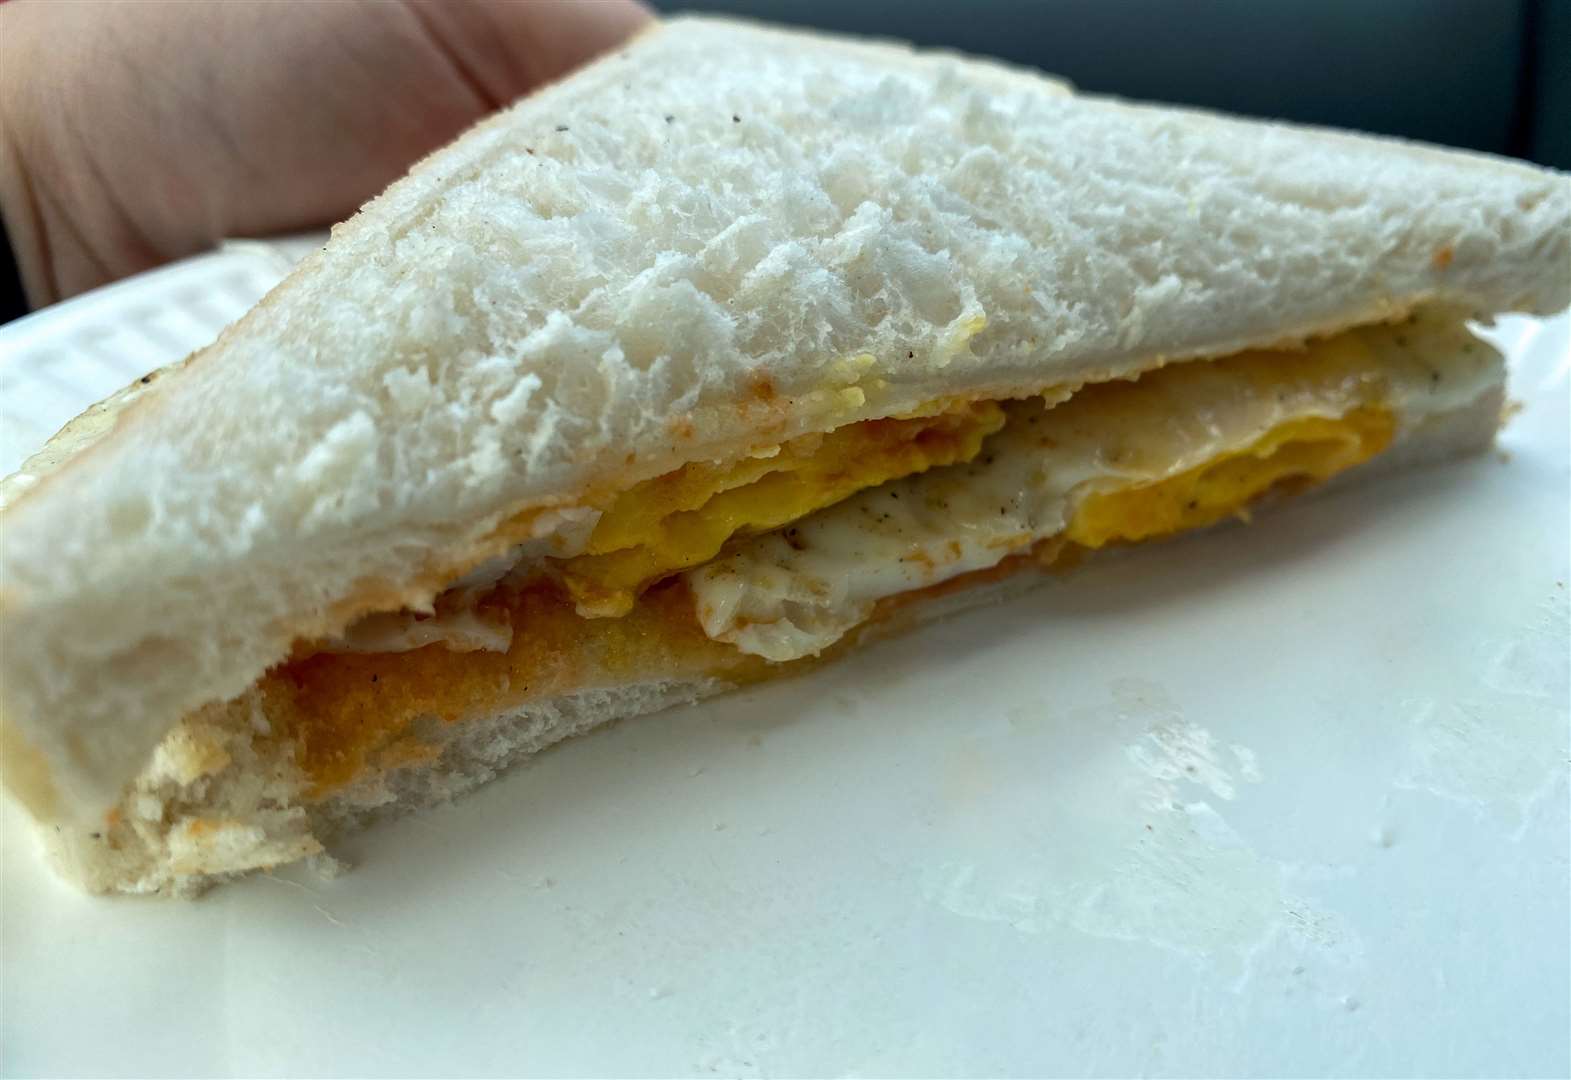 The egg sandwich might not look like much but it tasted delicious. Picture: Sam Lawrie